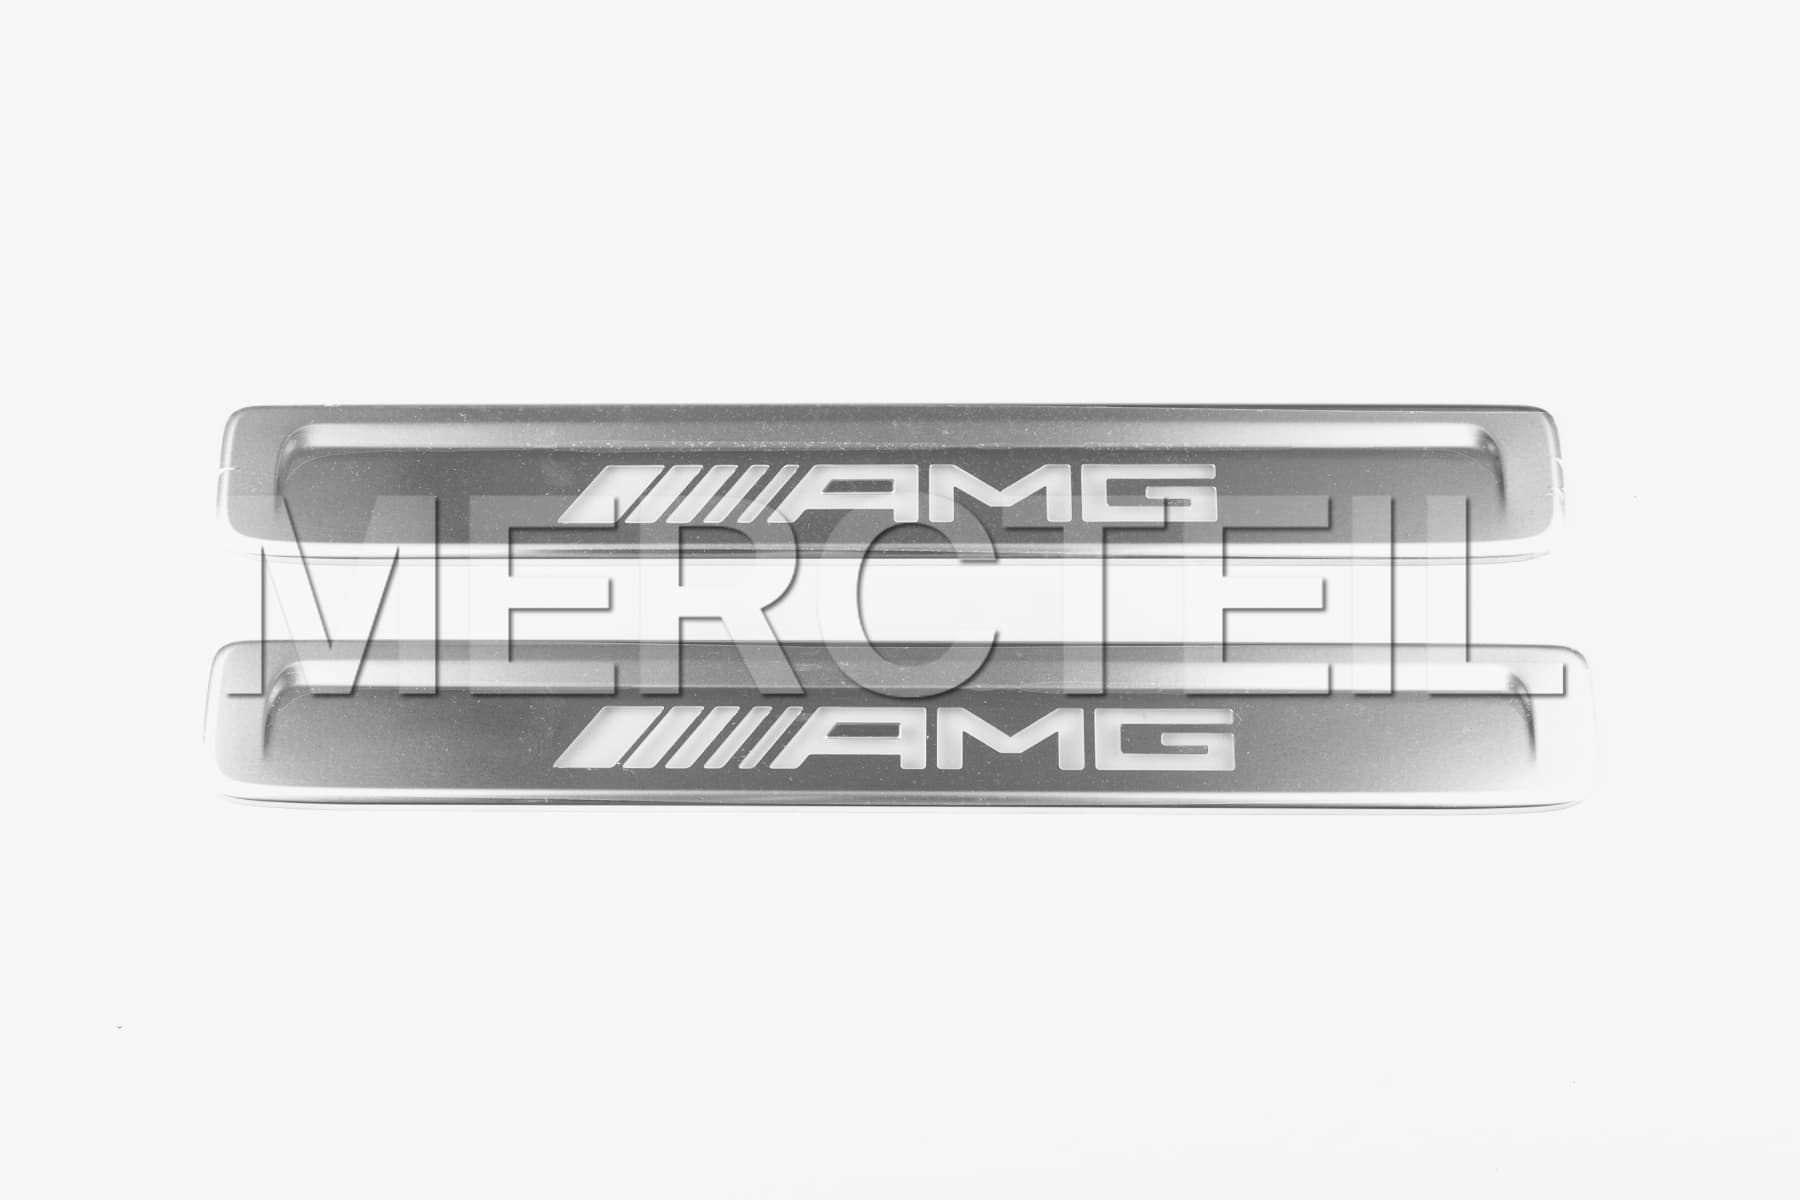 EQE / EQS Exchangeable AMG Silver Covers for Illuminated Door Sills Code U45 X294 V295 V297 Genuine Mercedes-AMG (Part number: A2976804408)